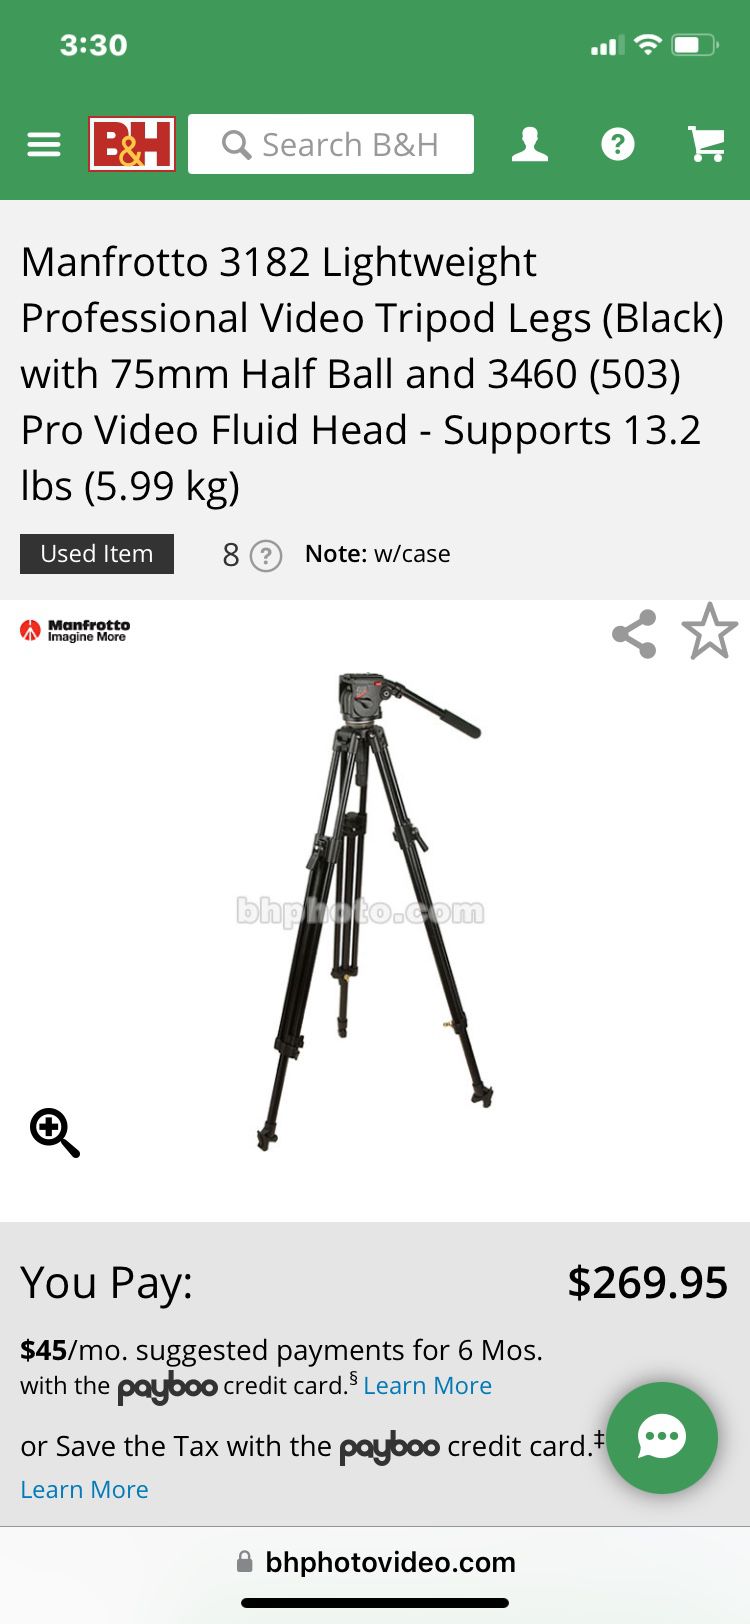 Manfrotto 3182 Lightweight Professional Video Tripod Legs (Black) with 75mm Half Ball and 3460 (503) Pro Video Fluid Head 